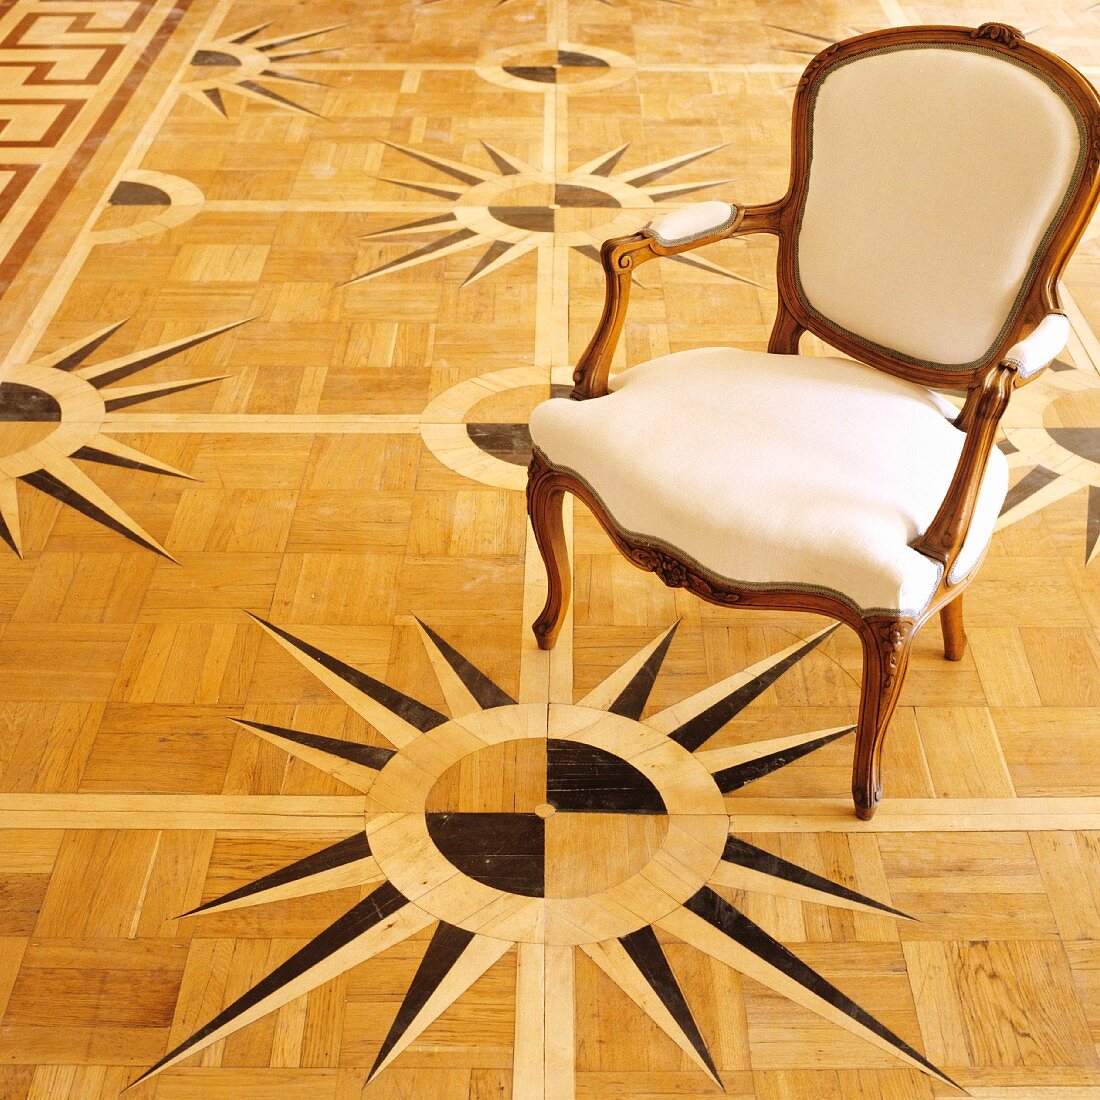 Rococo chair on parquet floor with marquetry compass pattern